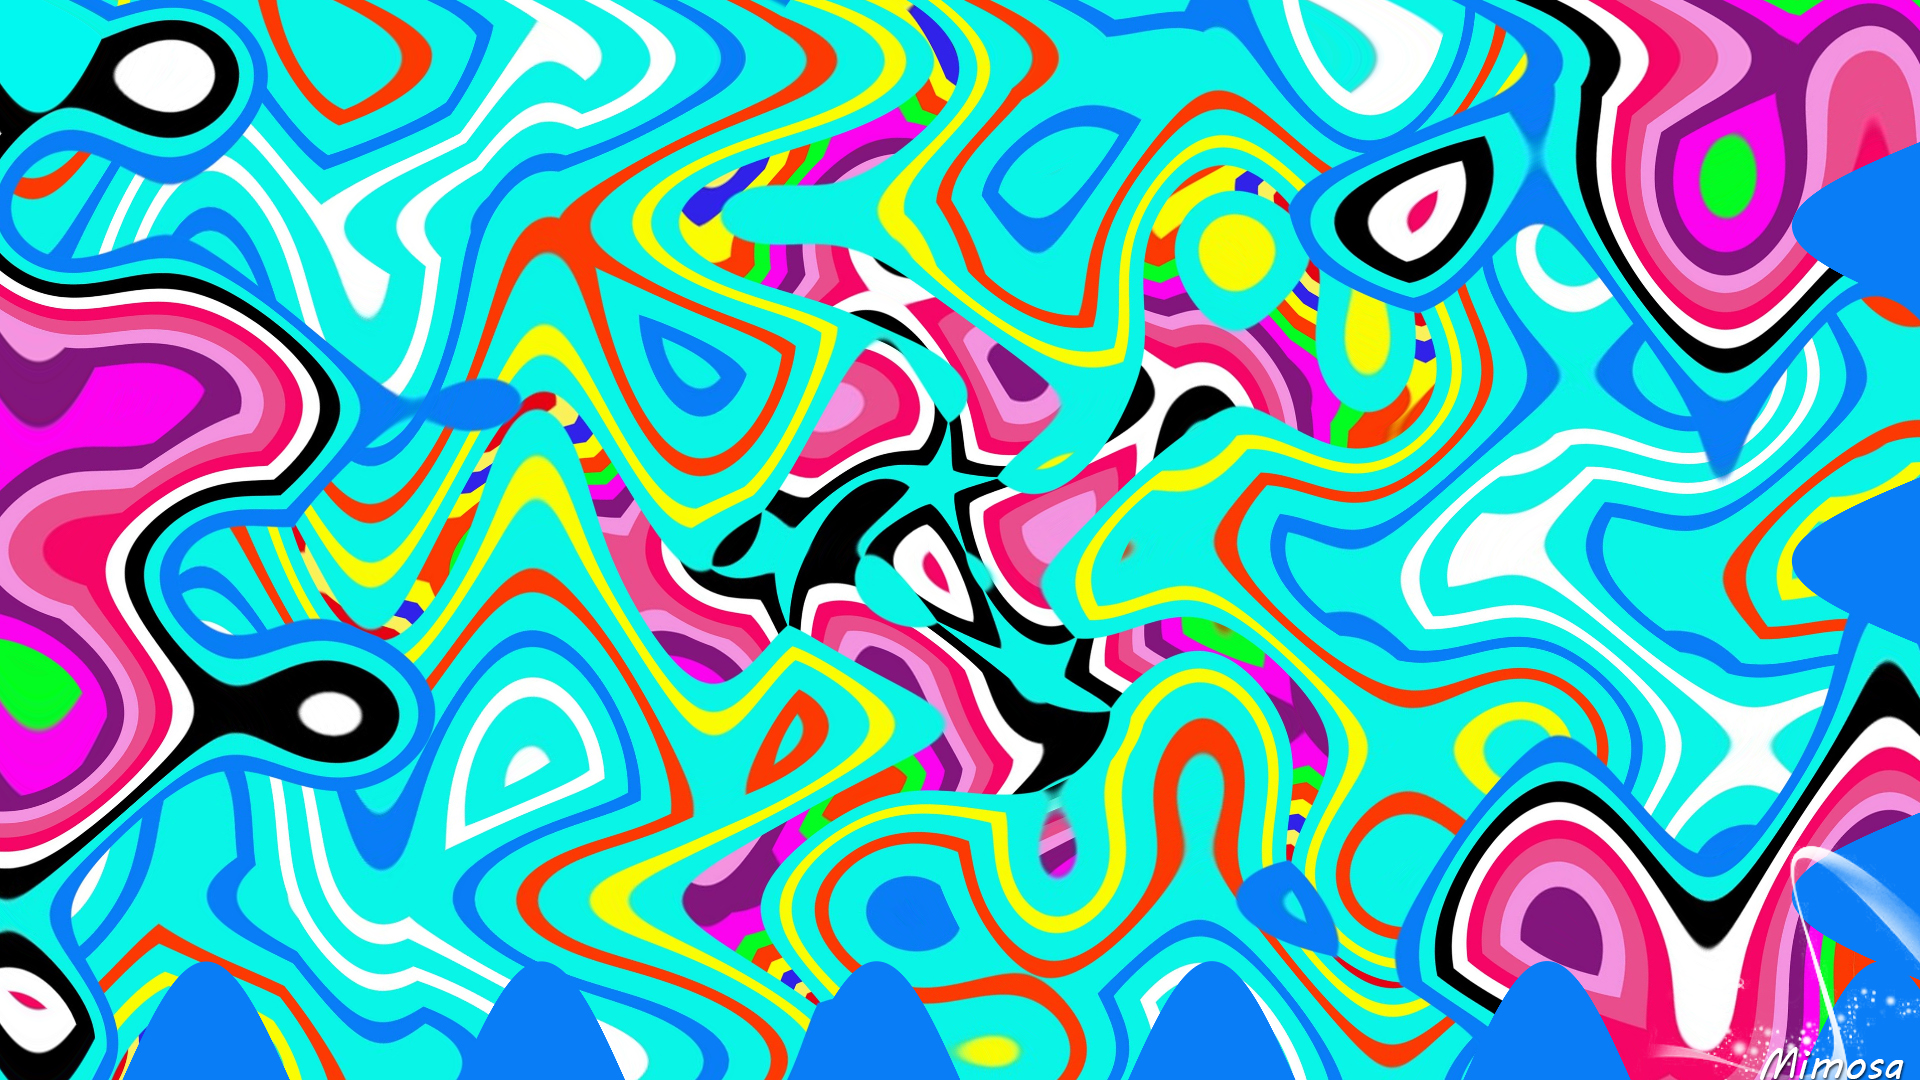 Abstract Artistic Blue Colorful Colors Digital Art Pink 1920x1080